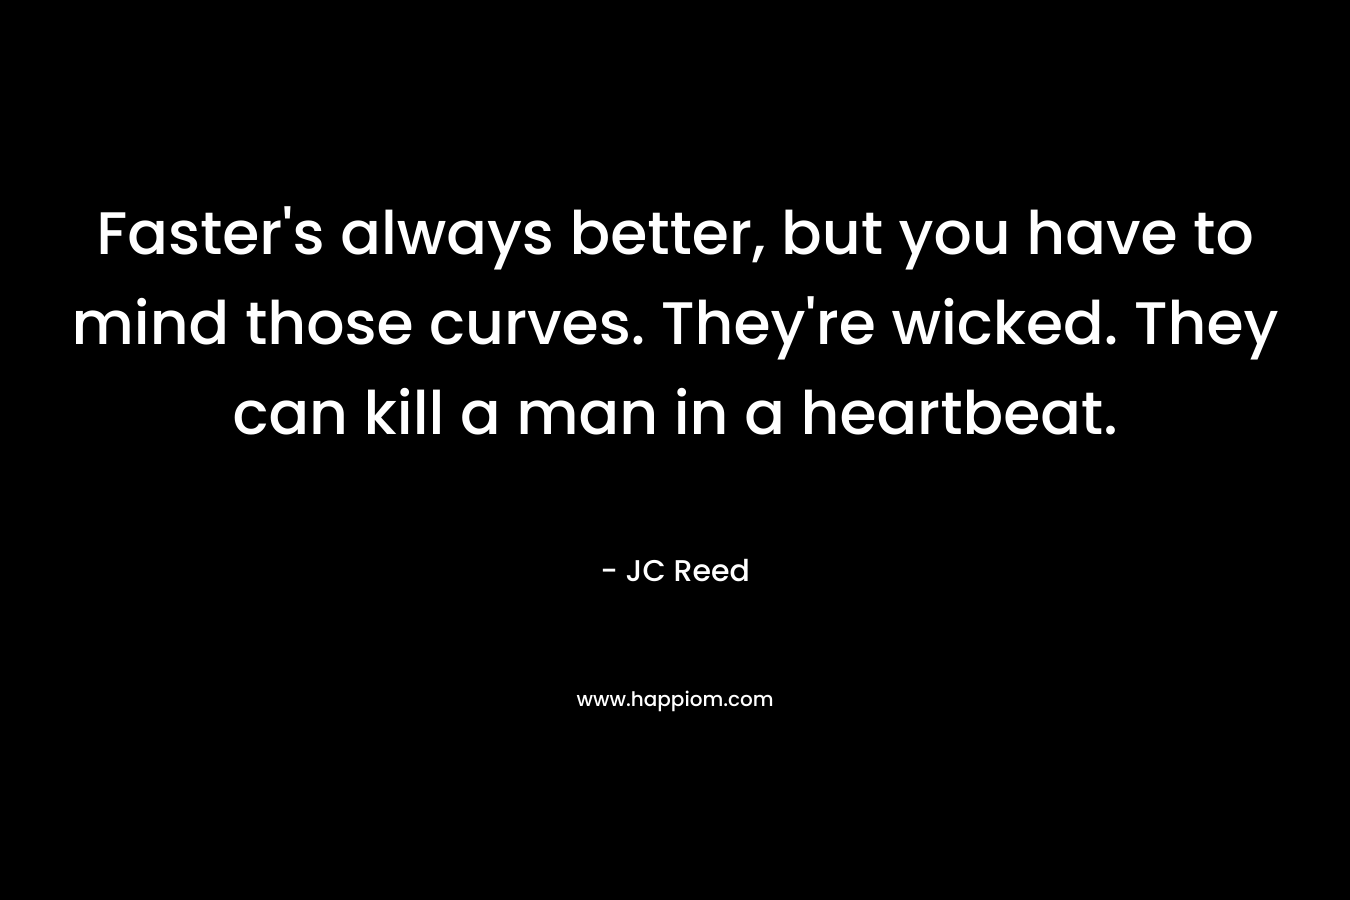 Faster’s always better, but you have to mind those curves. They’re wicked. They can kill a man in a heartbeat. – JC Reed